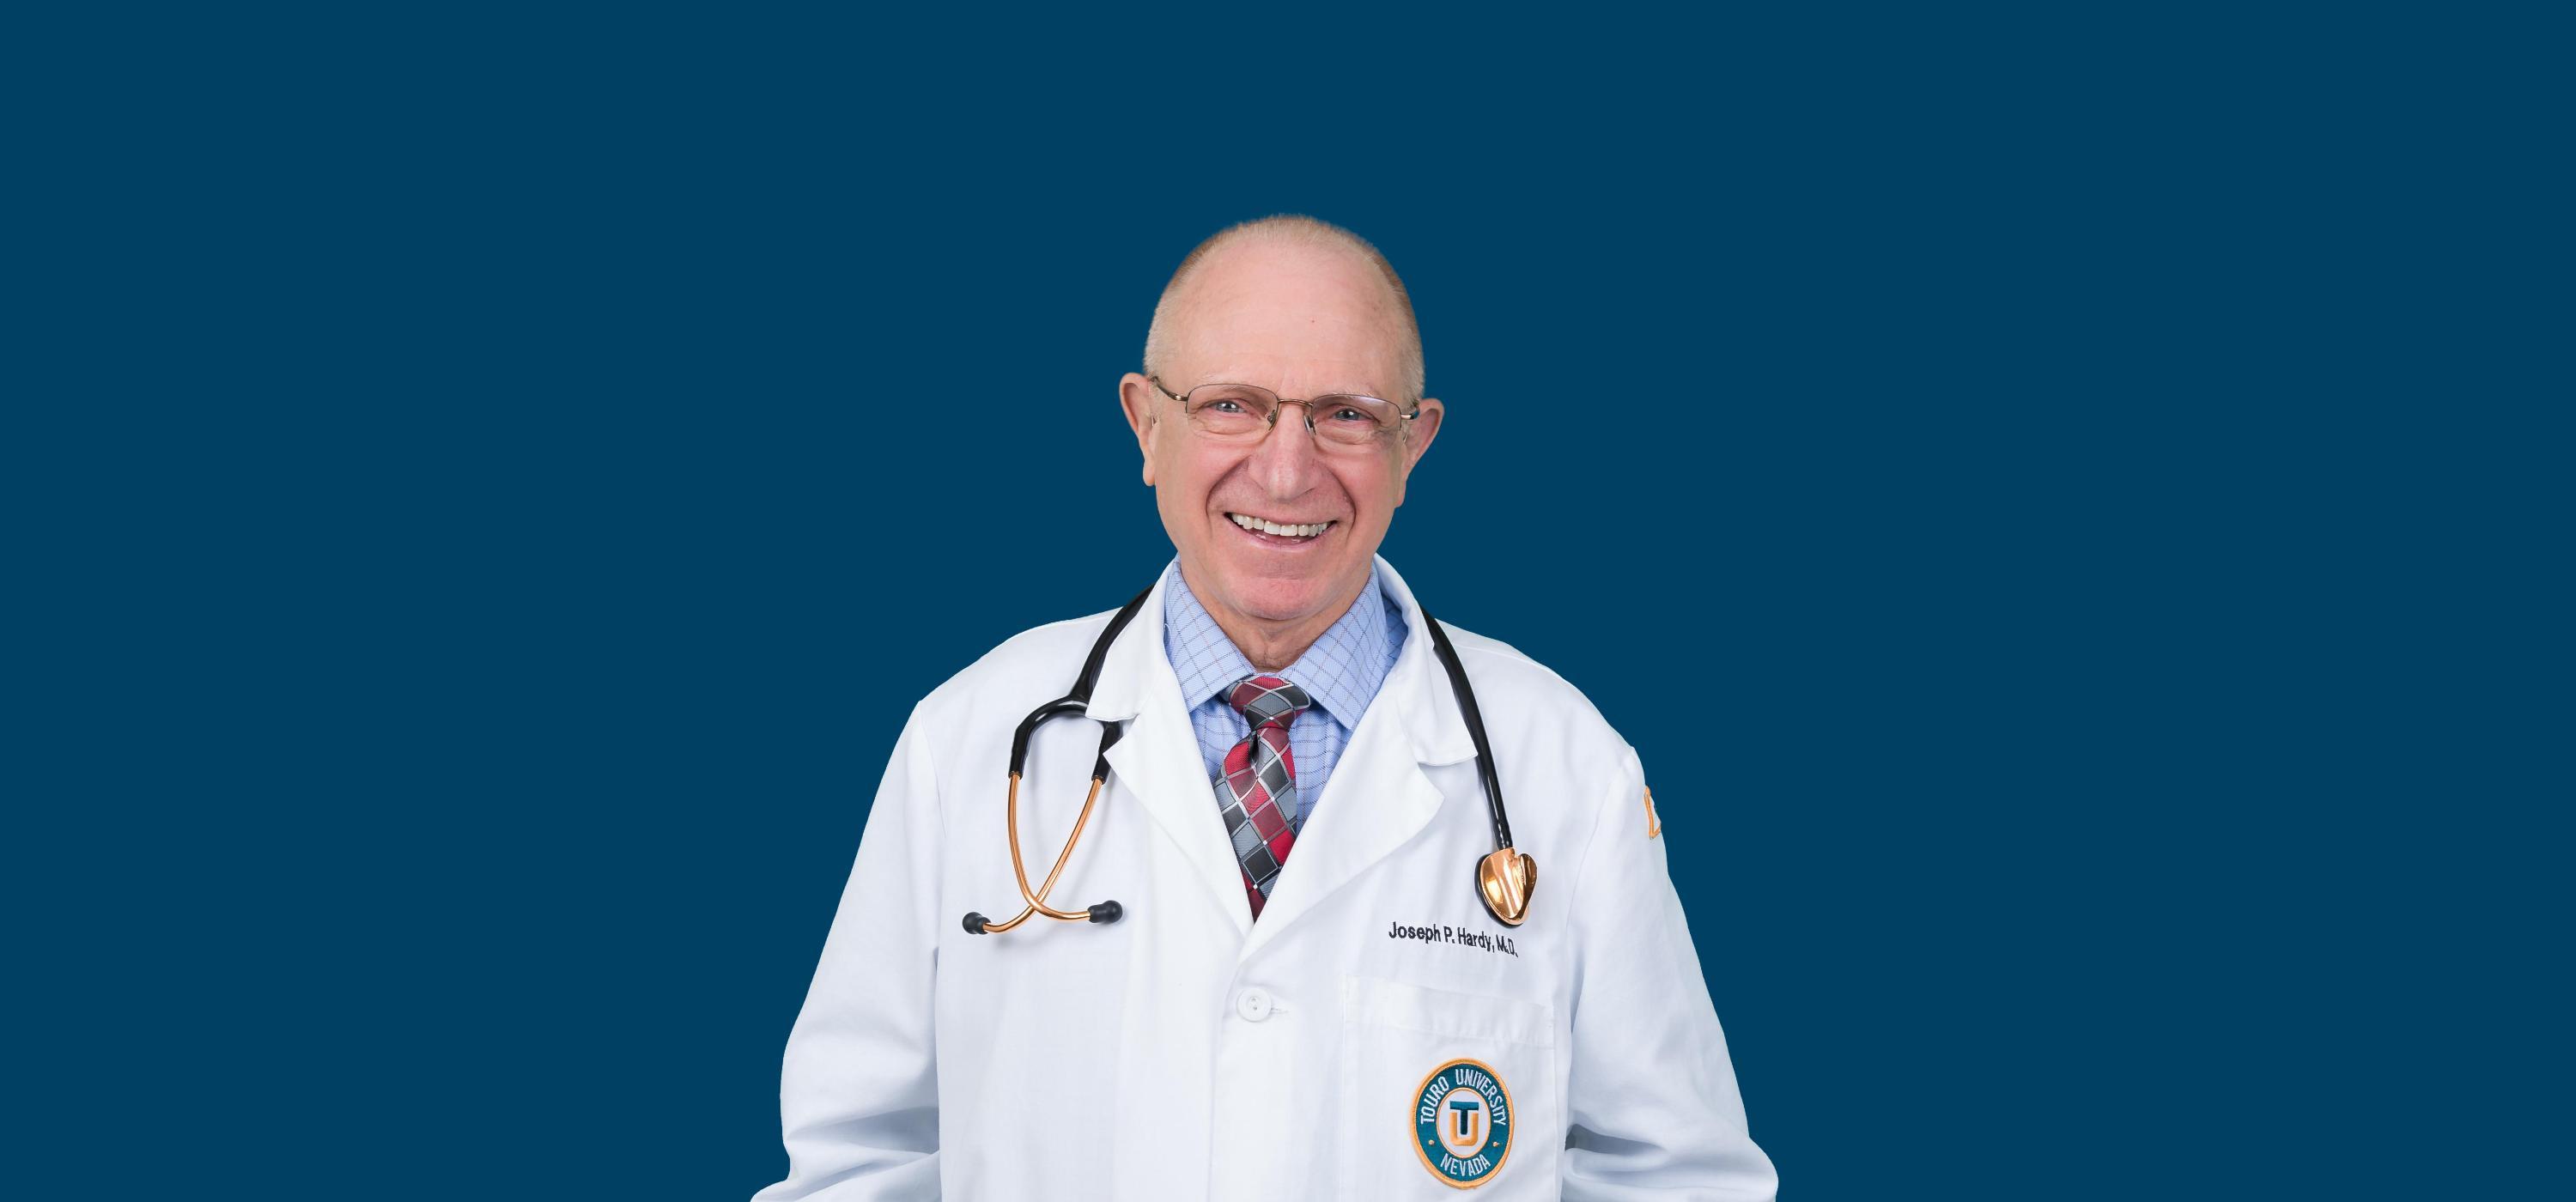 Associate Dean of Clinical Education in Touro’s College of Osteopathic Medicine, Dr. Joe Hardy